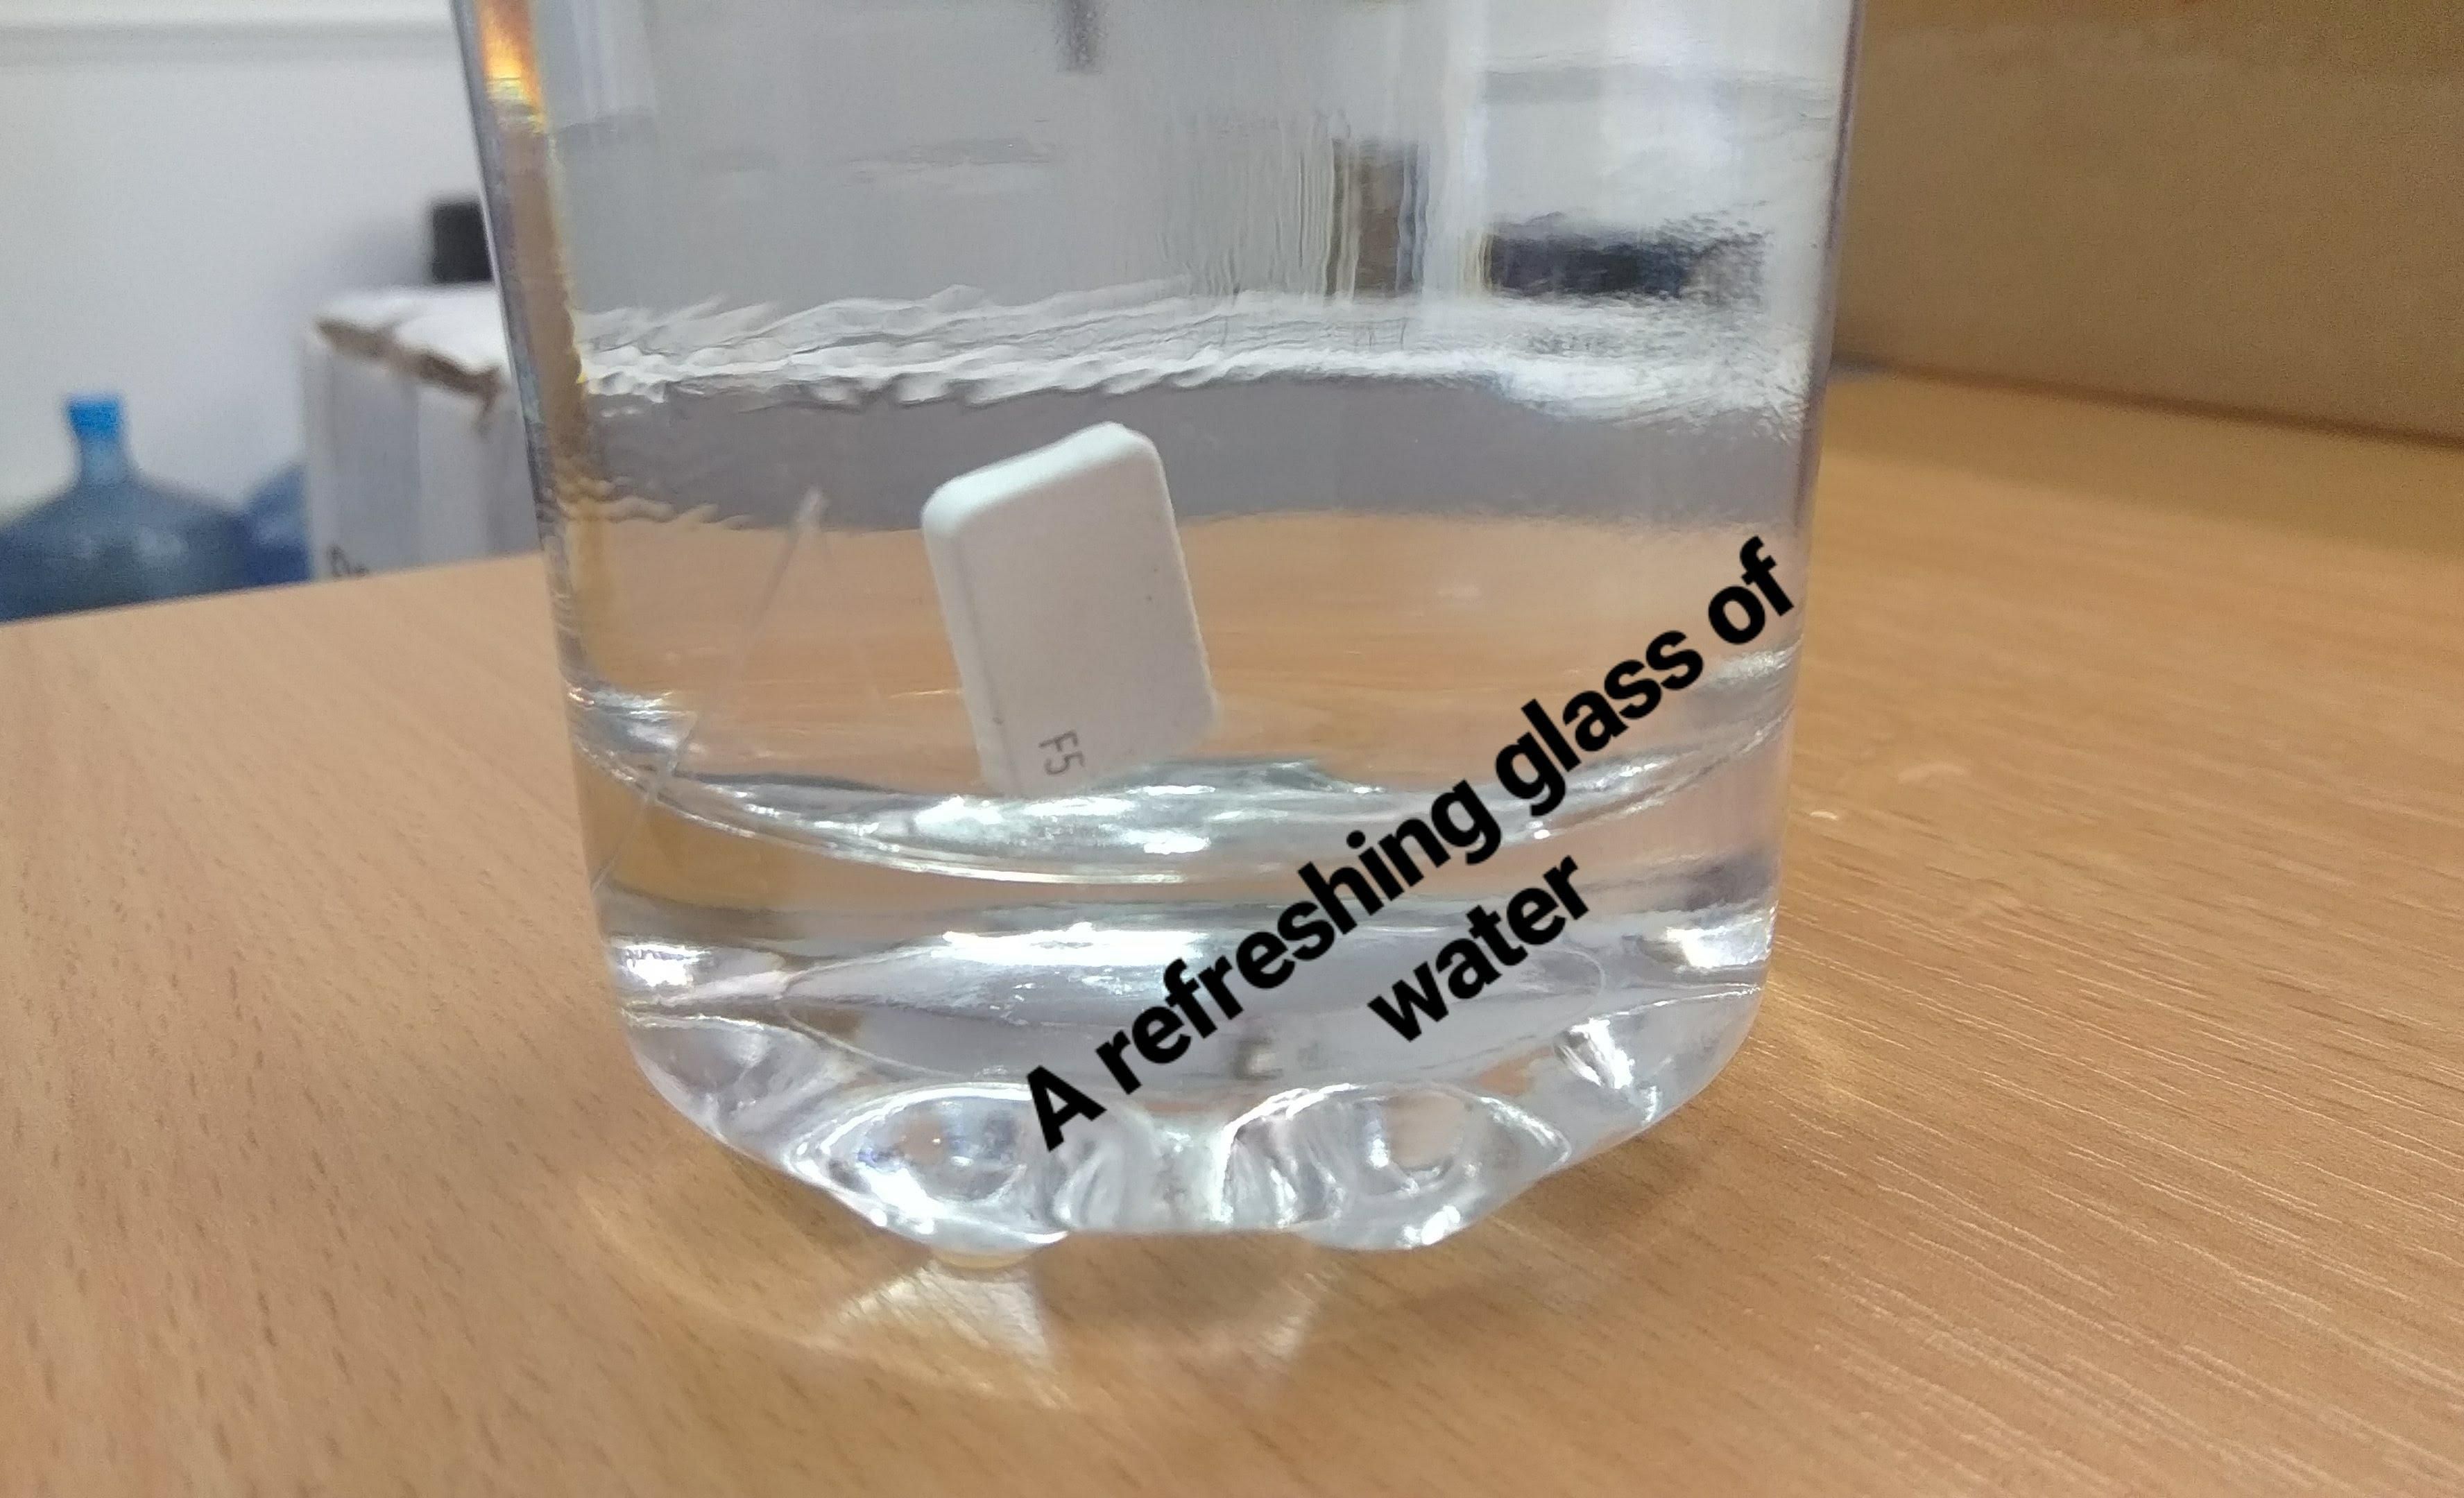 A refreshing glass of water